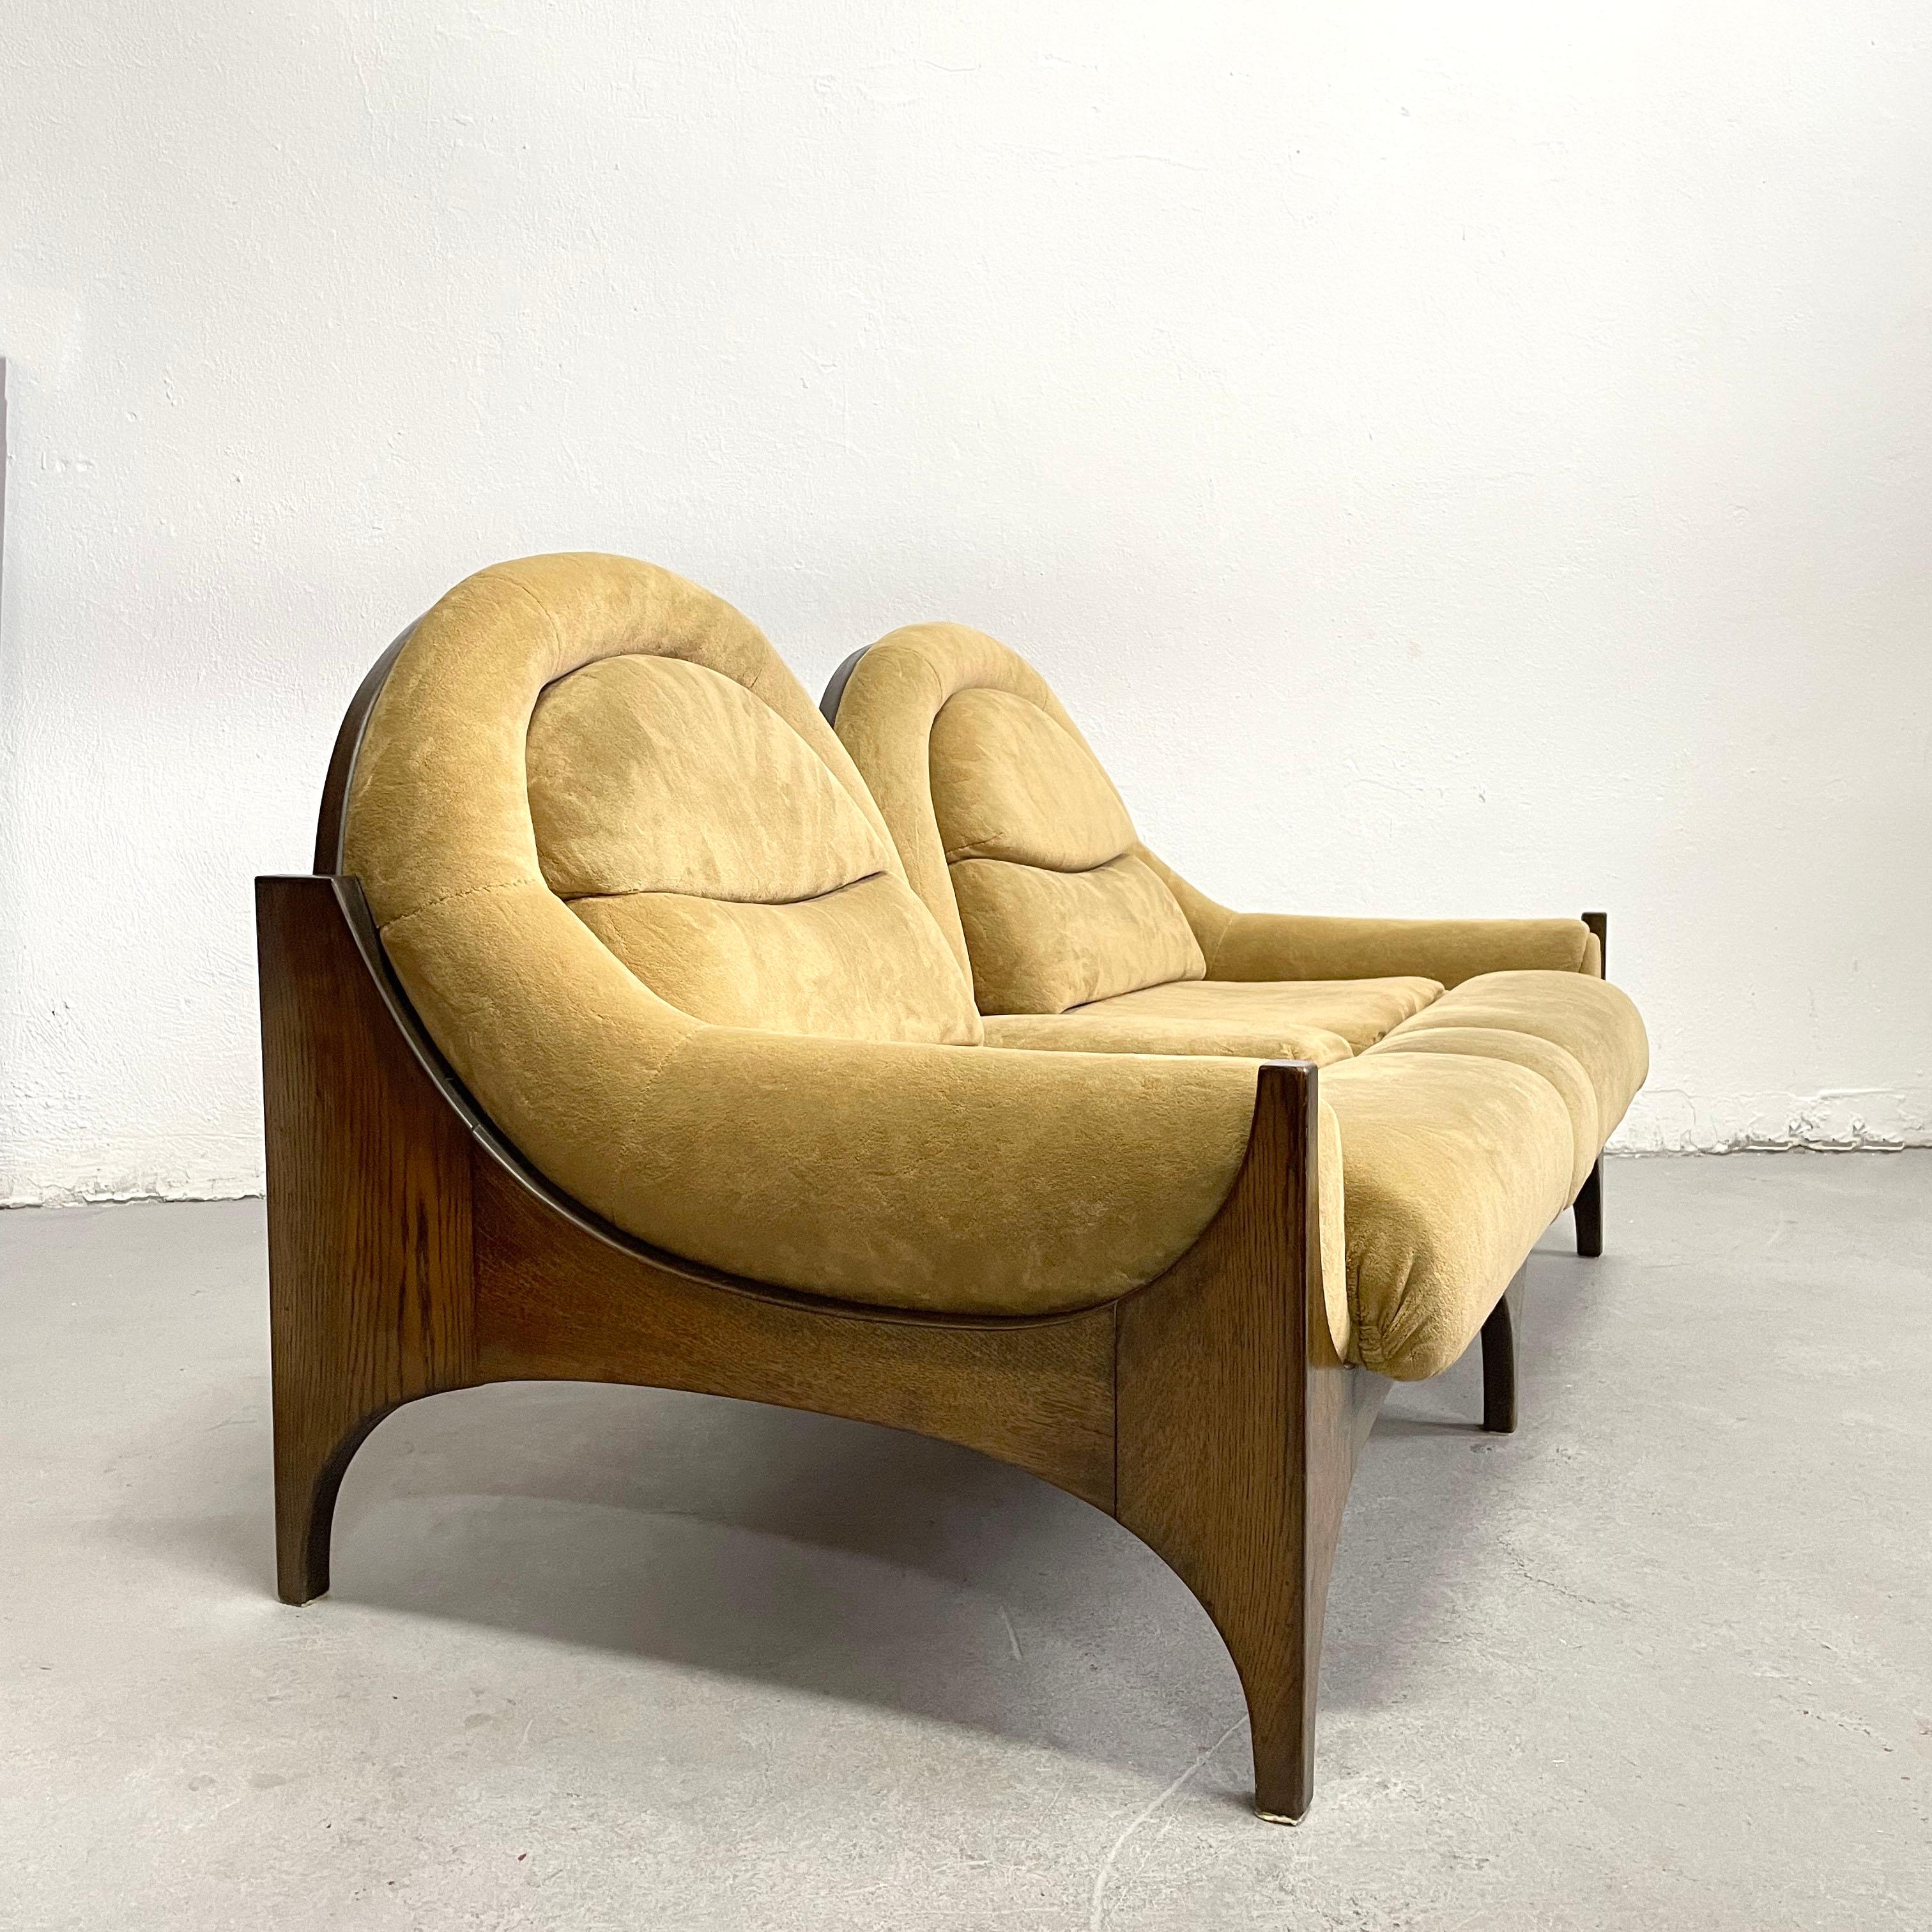 Stunning mid-century 2-seat sofa manufactured in Austria in the 1960s.

The designer and the manufacturer are unknown.

The form of the wooden frame is reminiscent of the works of Austrian born designer Henry P. Glass.

The walnut colour wooden